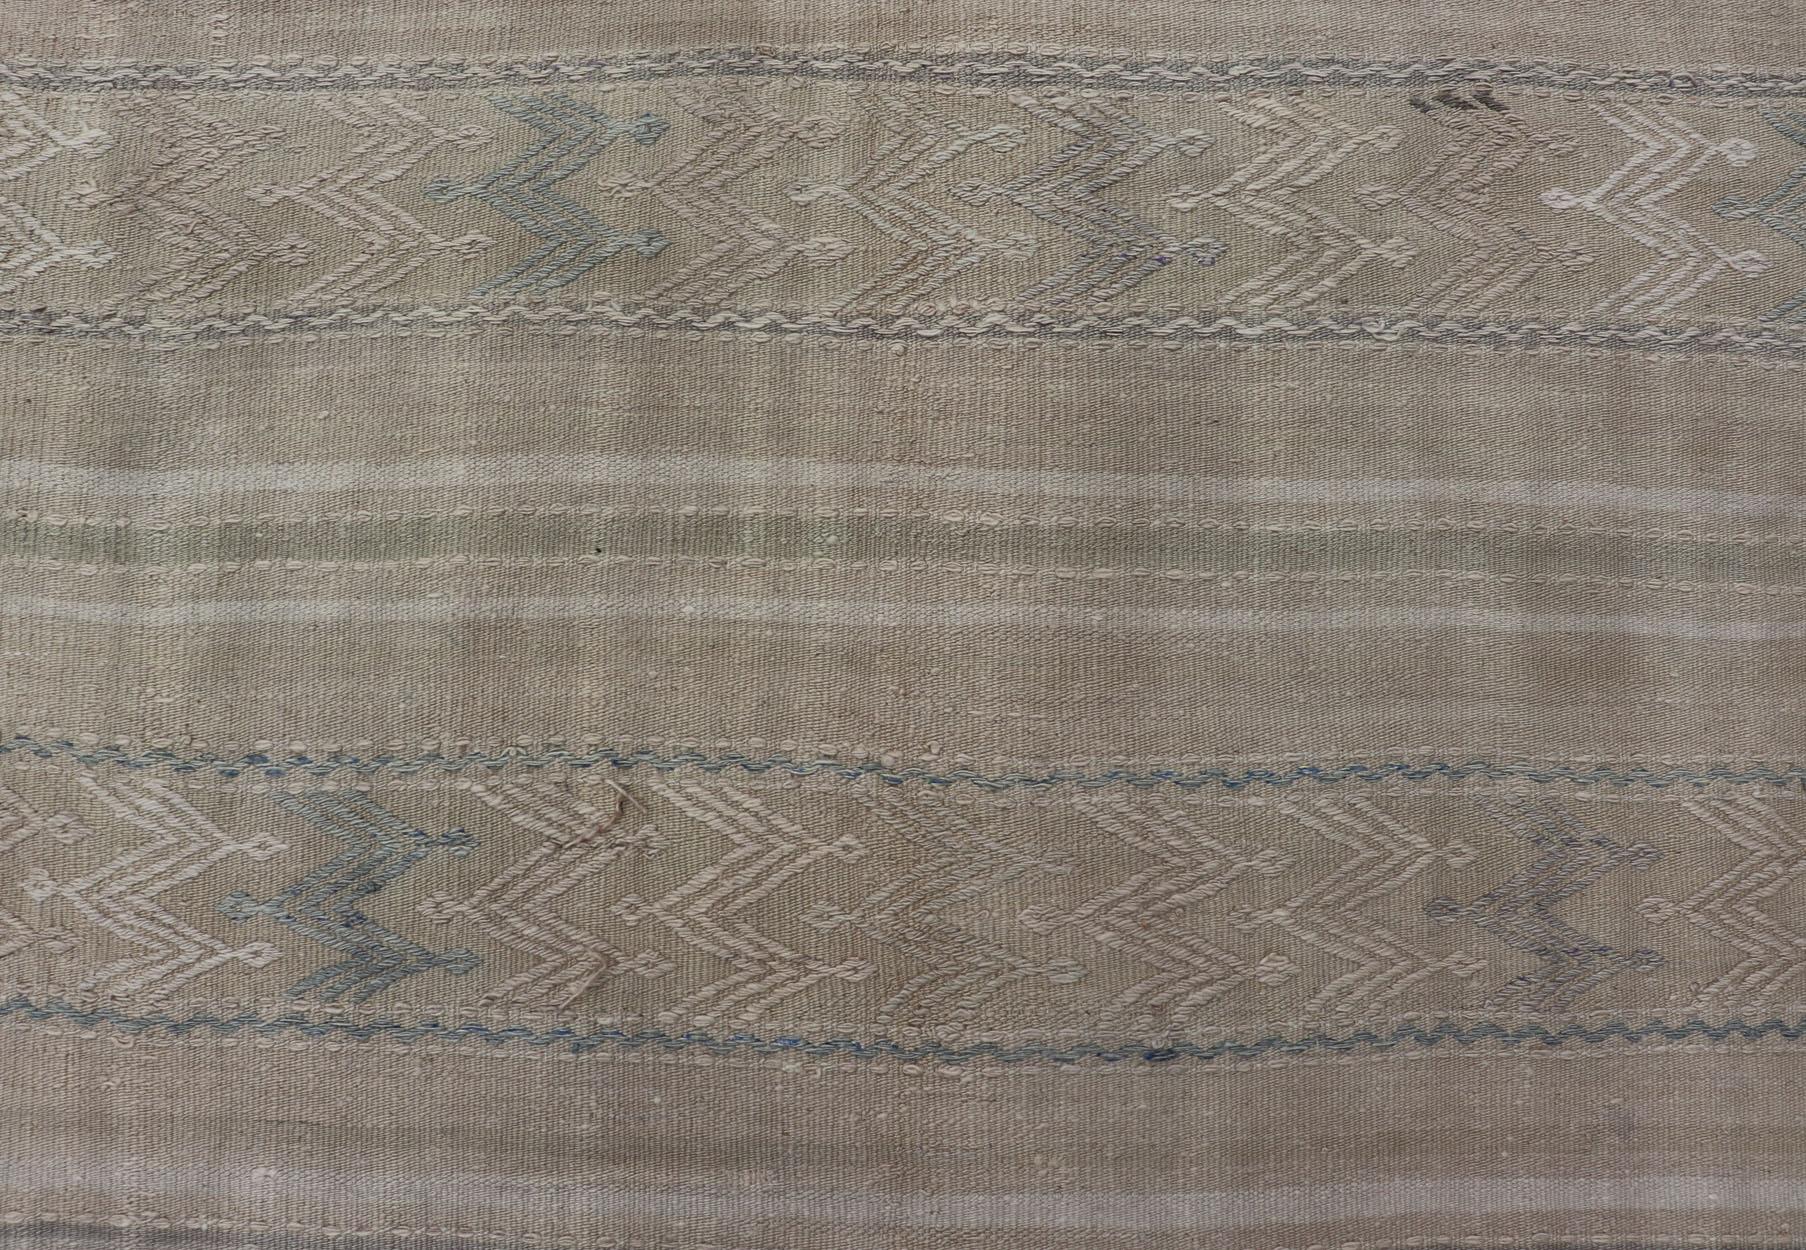 Turkish Flat-Weave Kilim with Tribal Embroideries in Taupe, Tan, Blue-Gray Color For Sale 5